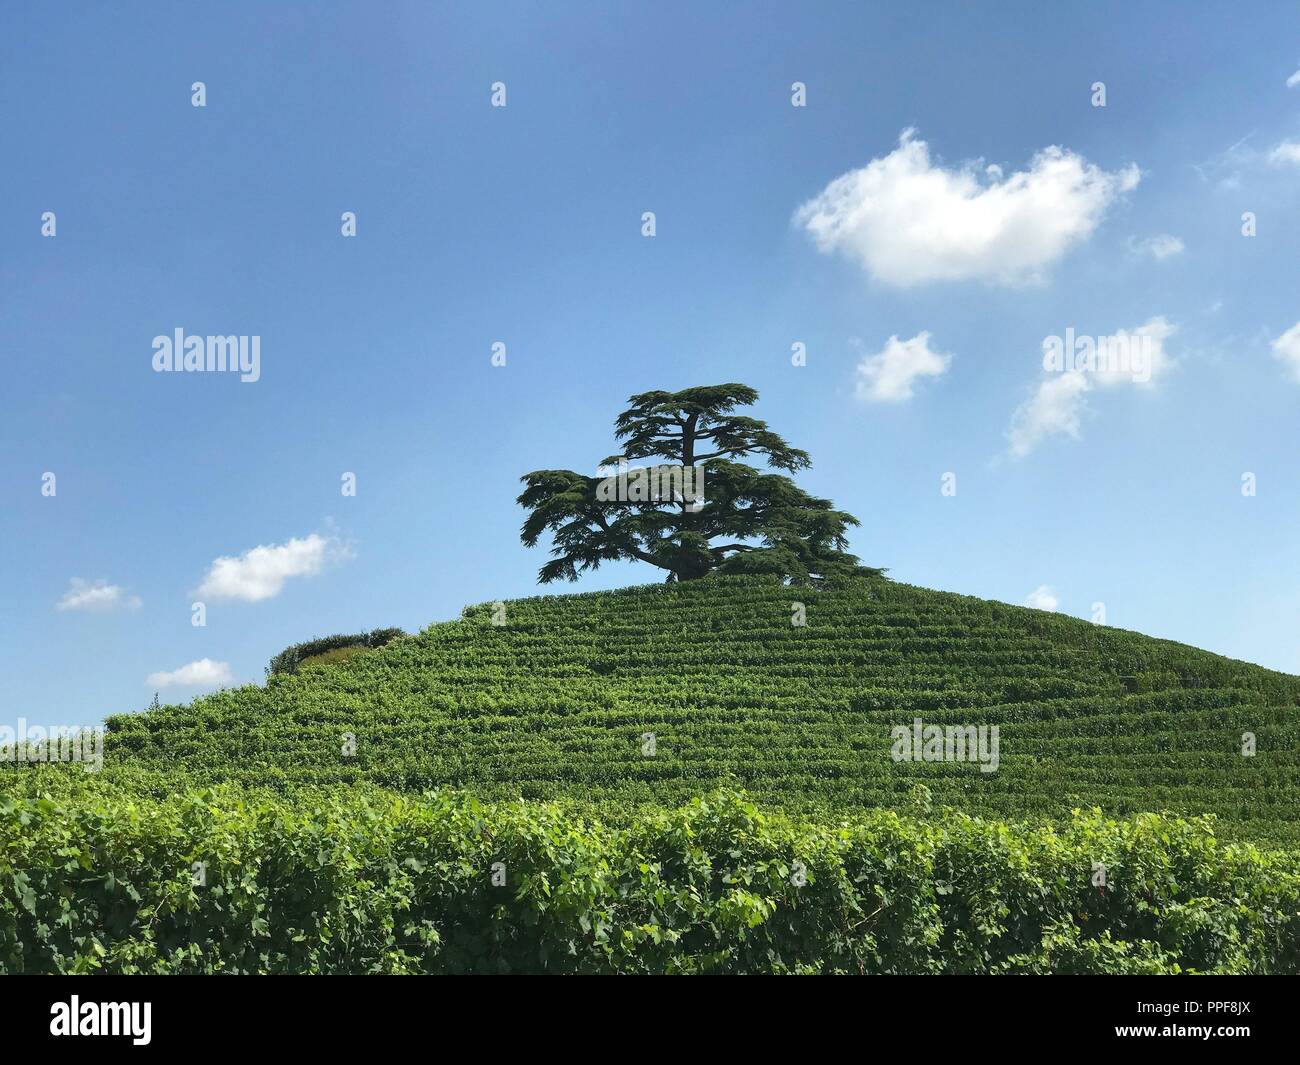 At the top of Monfalletto hill stands a cedar of Lebanon. The tree was planted by Costanzo Falletti di Rodello and Eulalia Della Chiesa di Cervignasco in memory of their wedding celebrated in 1856 and as a symbol of their love for the land. | usage worldwide Stock Photo